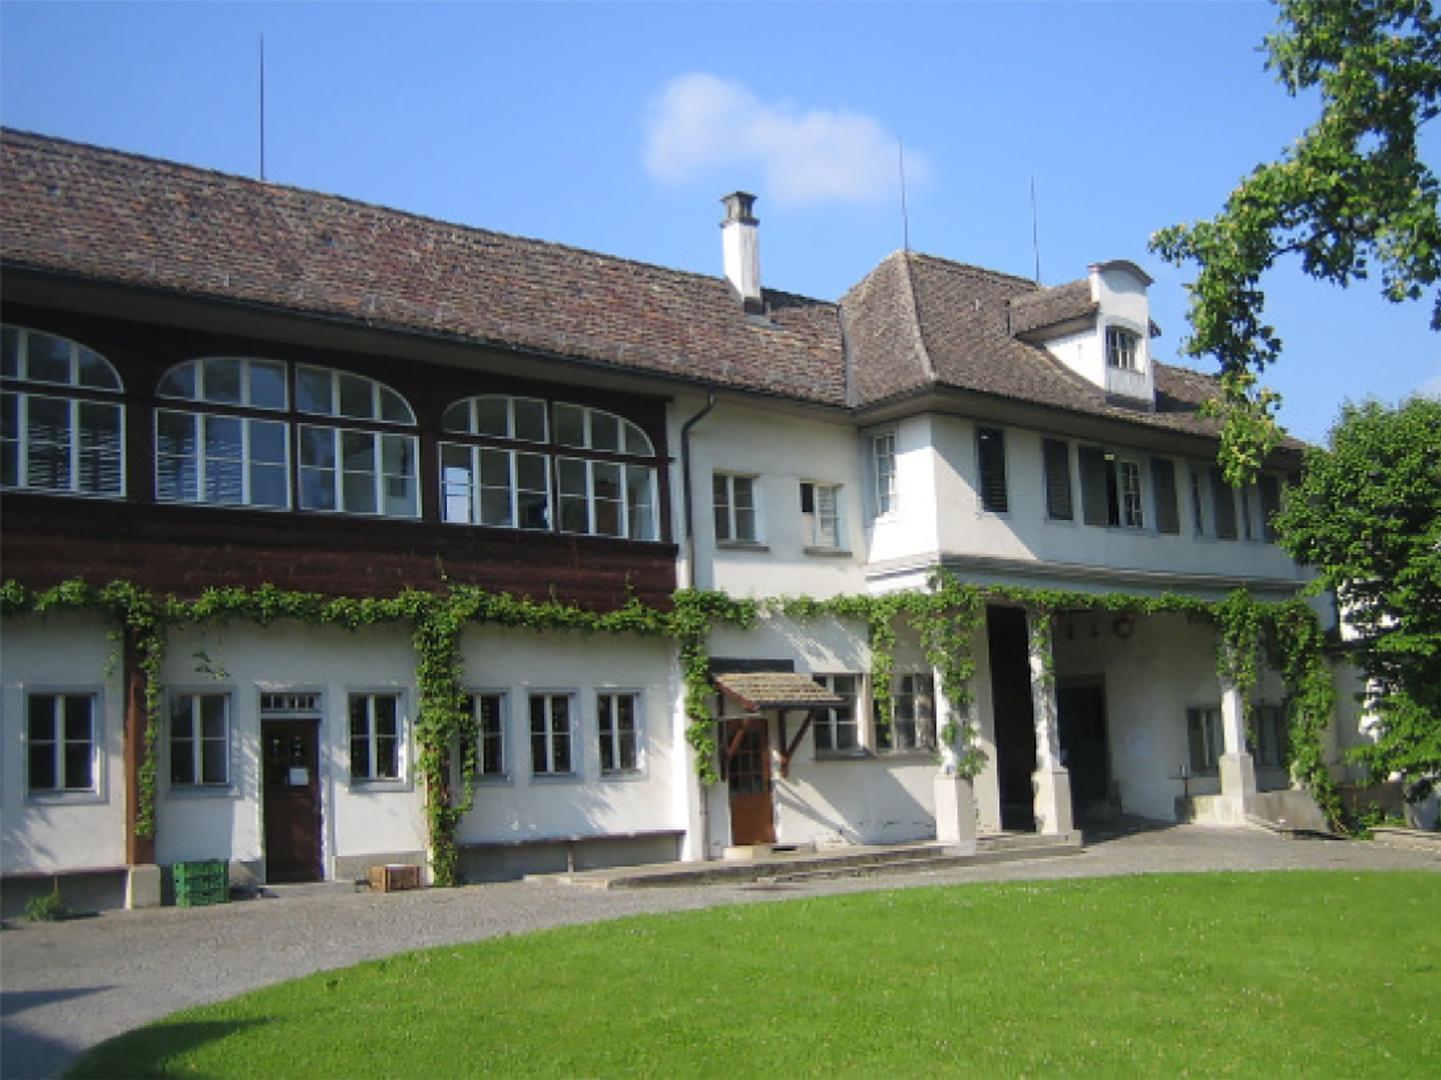 Castle Wing, ACW Agroscope, Wädenswil